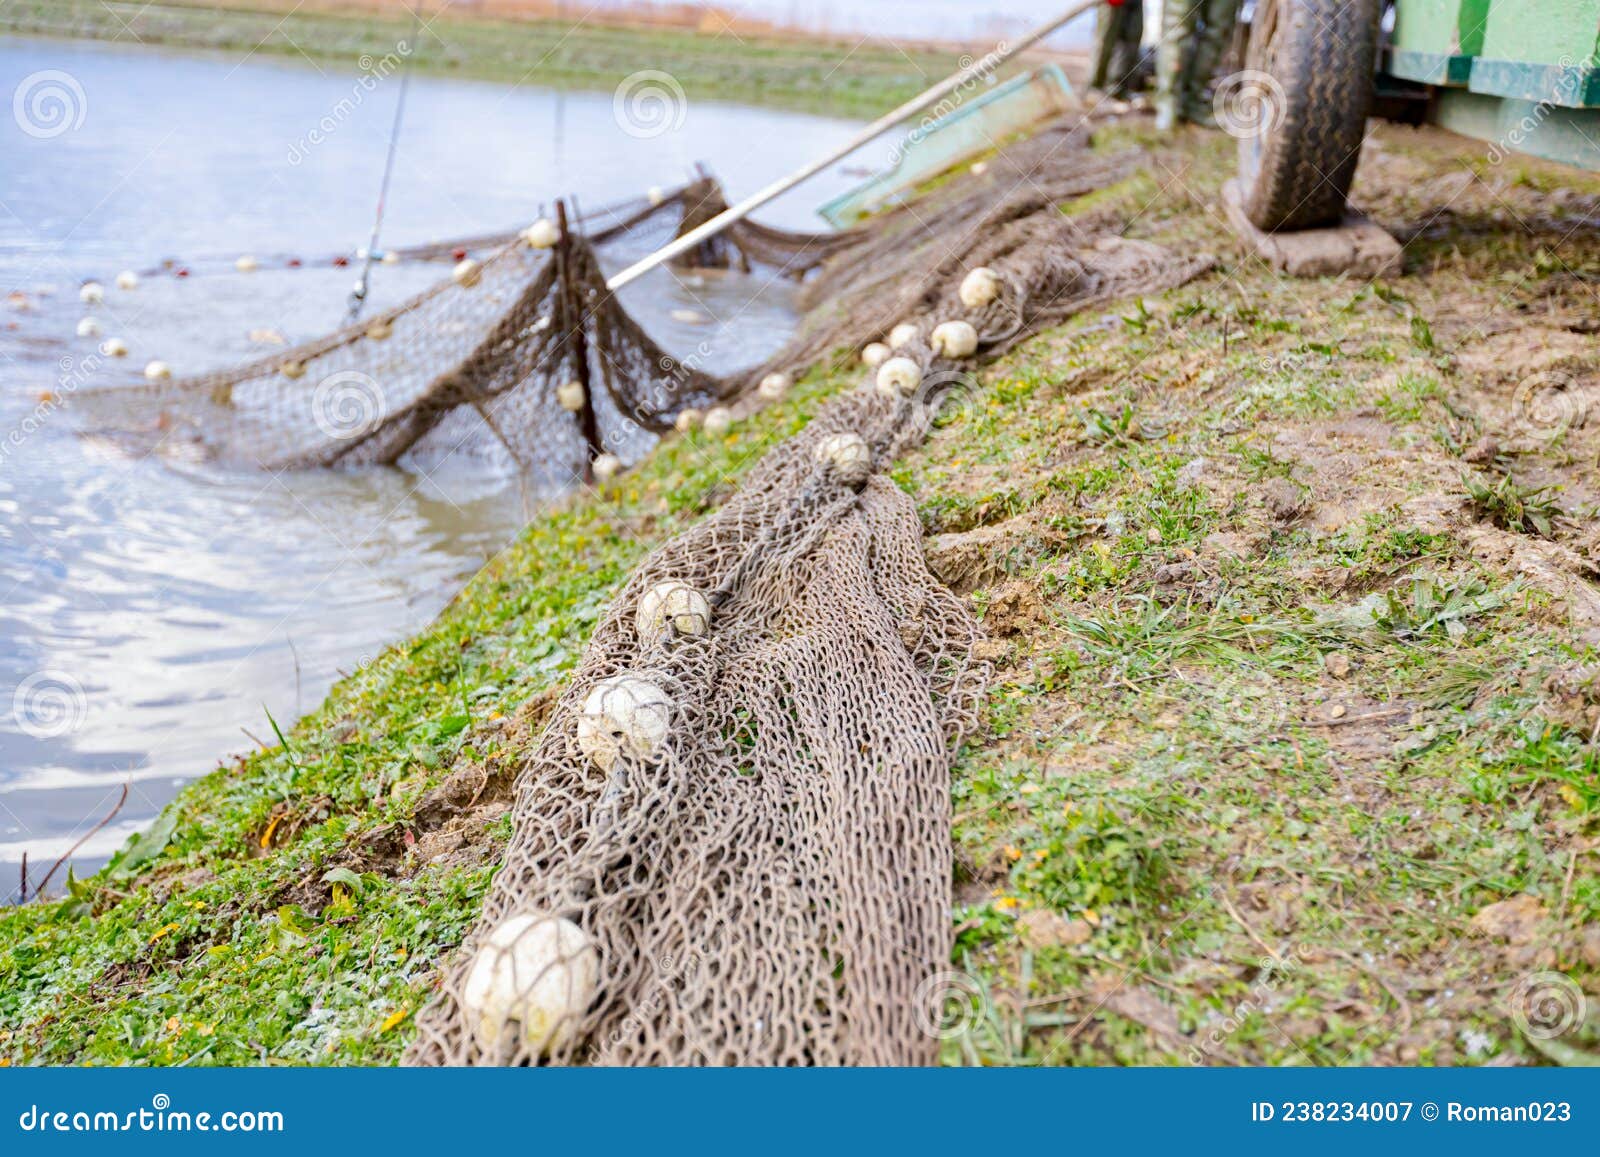 Harvesting Carp Fish from Pond with a Long Handle Fishing Net Stock Image -  Image of angling, haul: 238234007